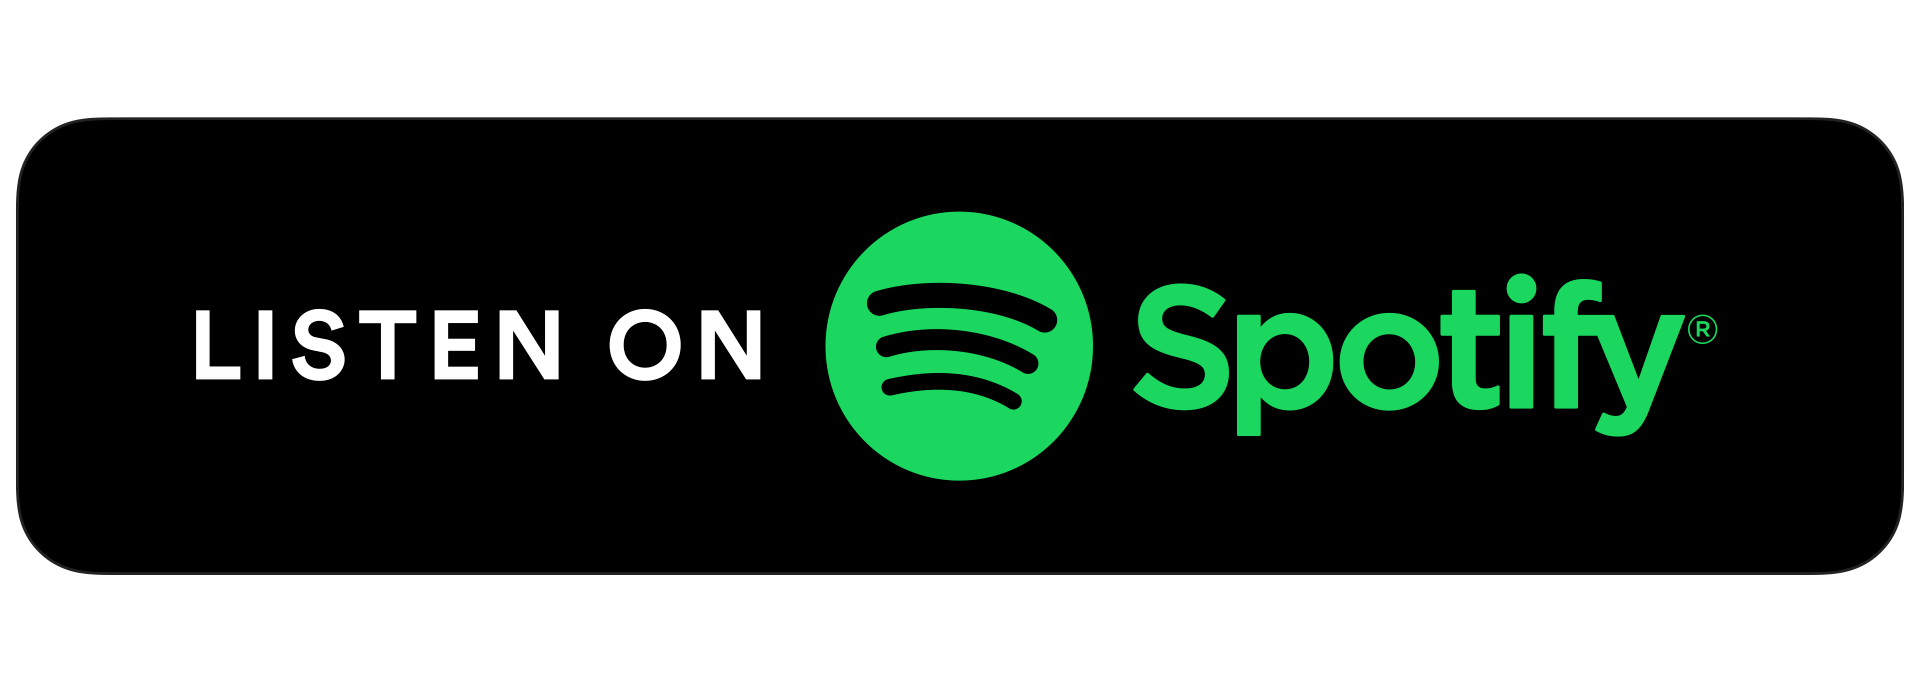 Image of Listen on Spotify button